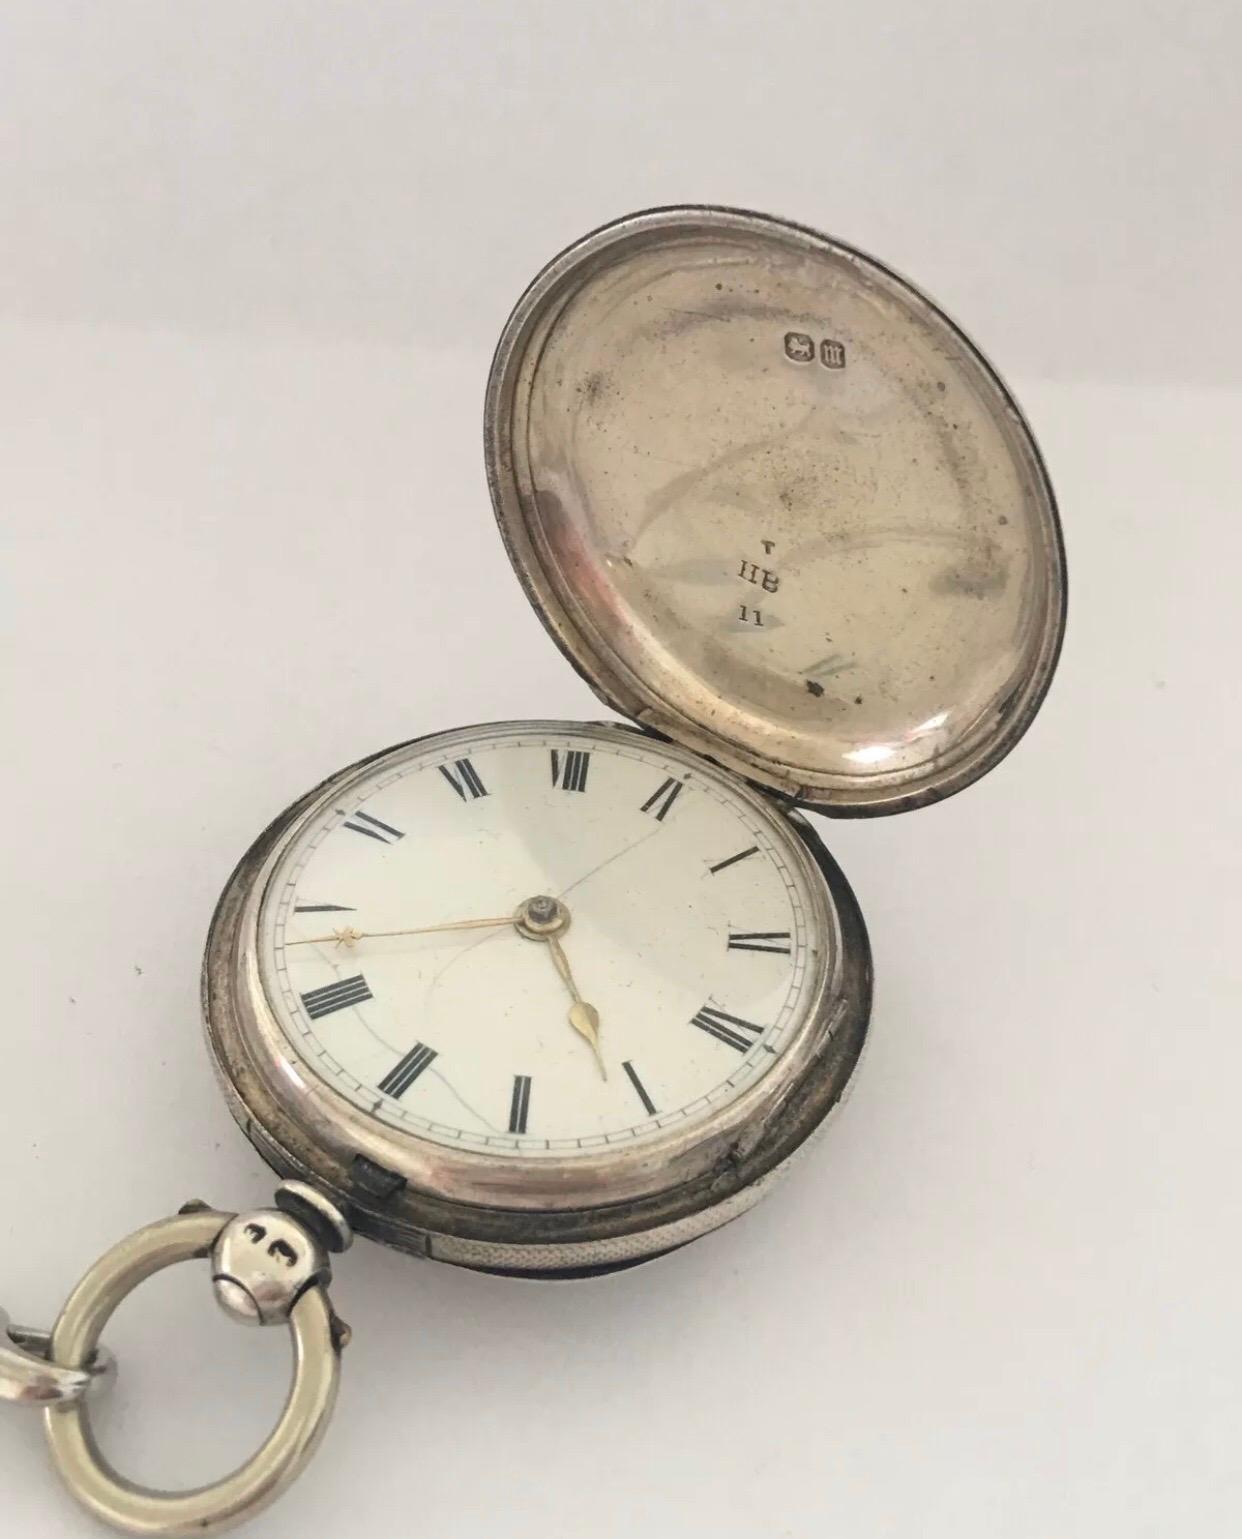 
Antique Full Hunter Silver Fusee Pocket Watch with chain


This good quality 45mm diameter watch is in good working condition and it is running well. Visible signs of ageing and wear with cracks on the enamel dial. Some dents and light scratches on